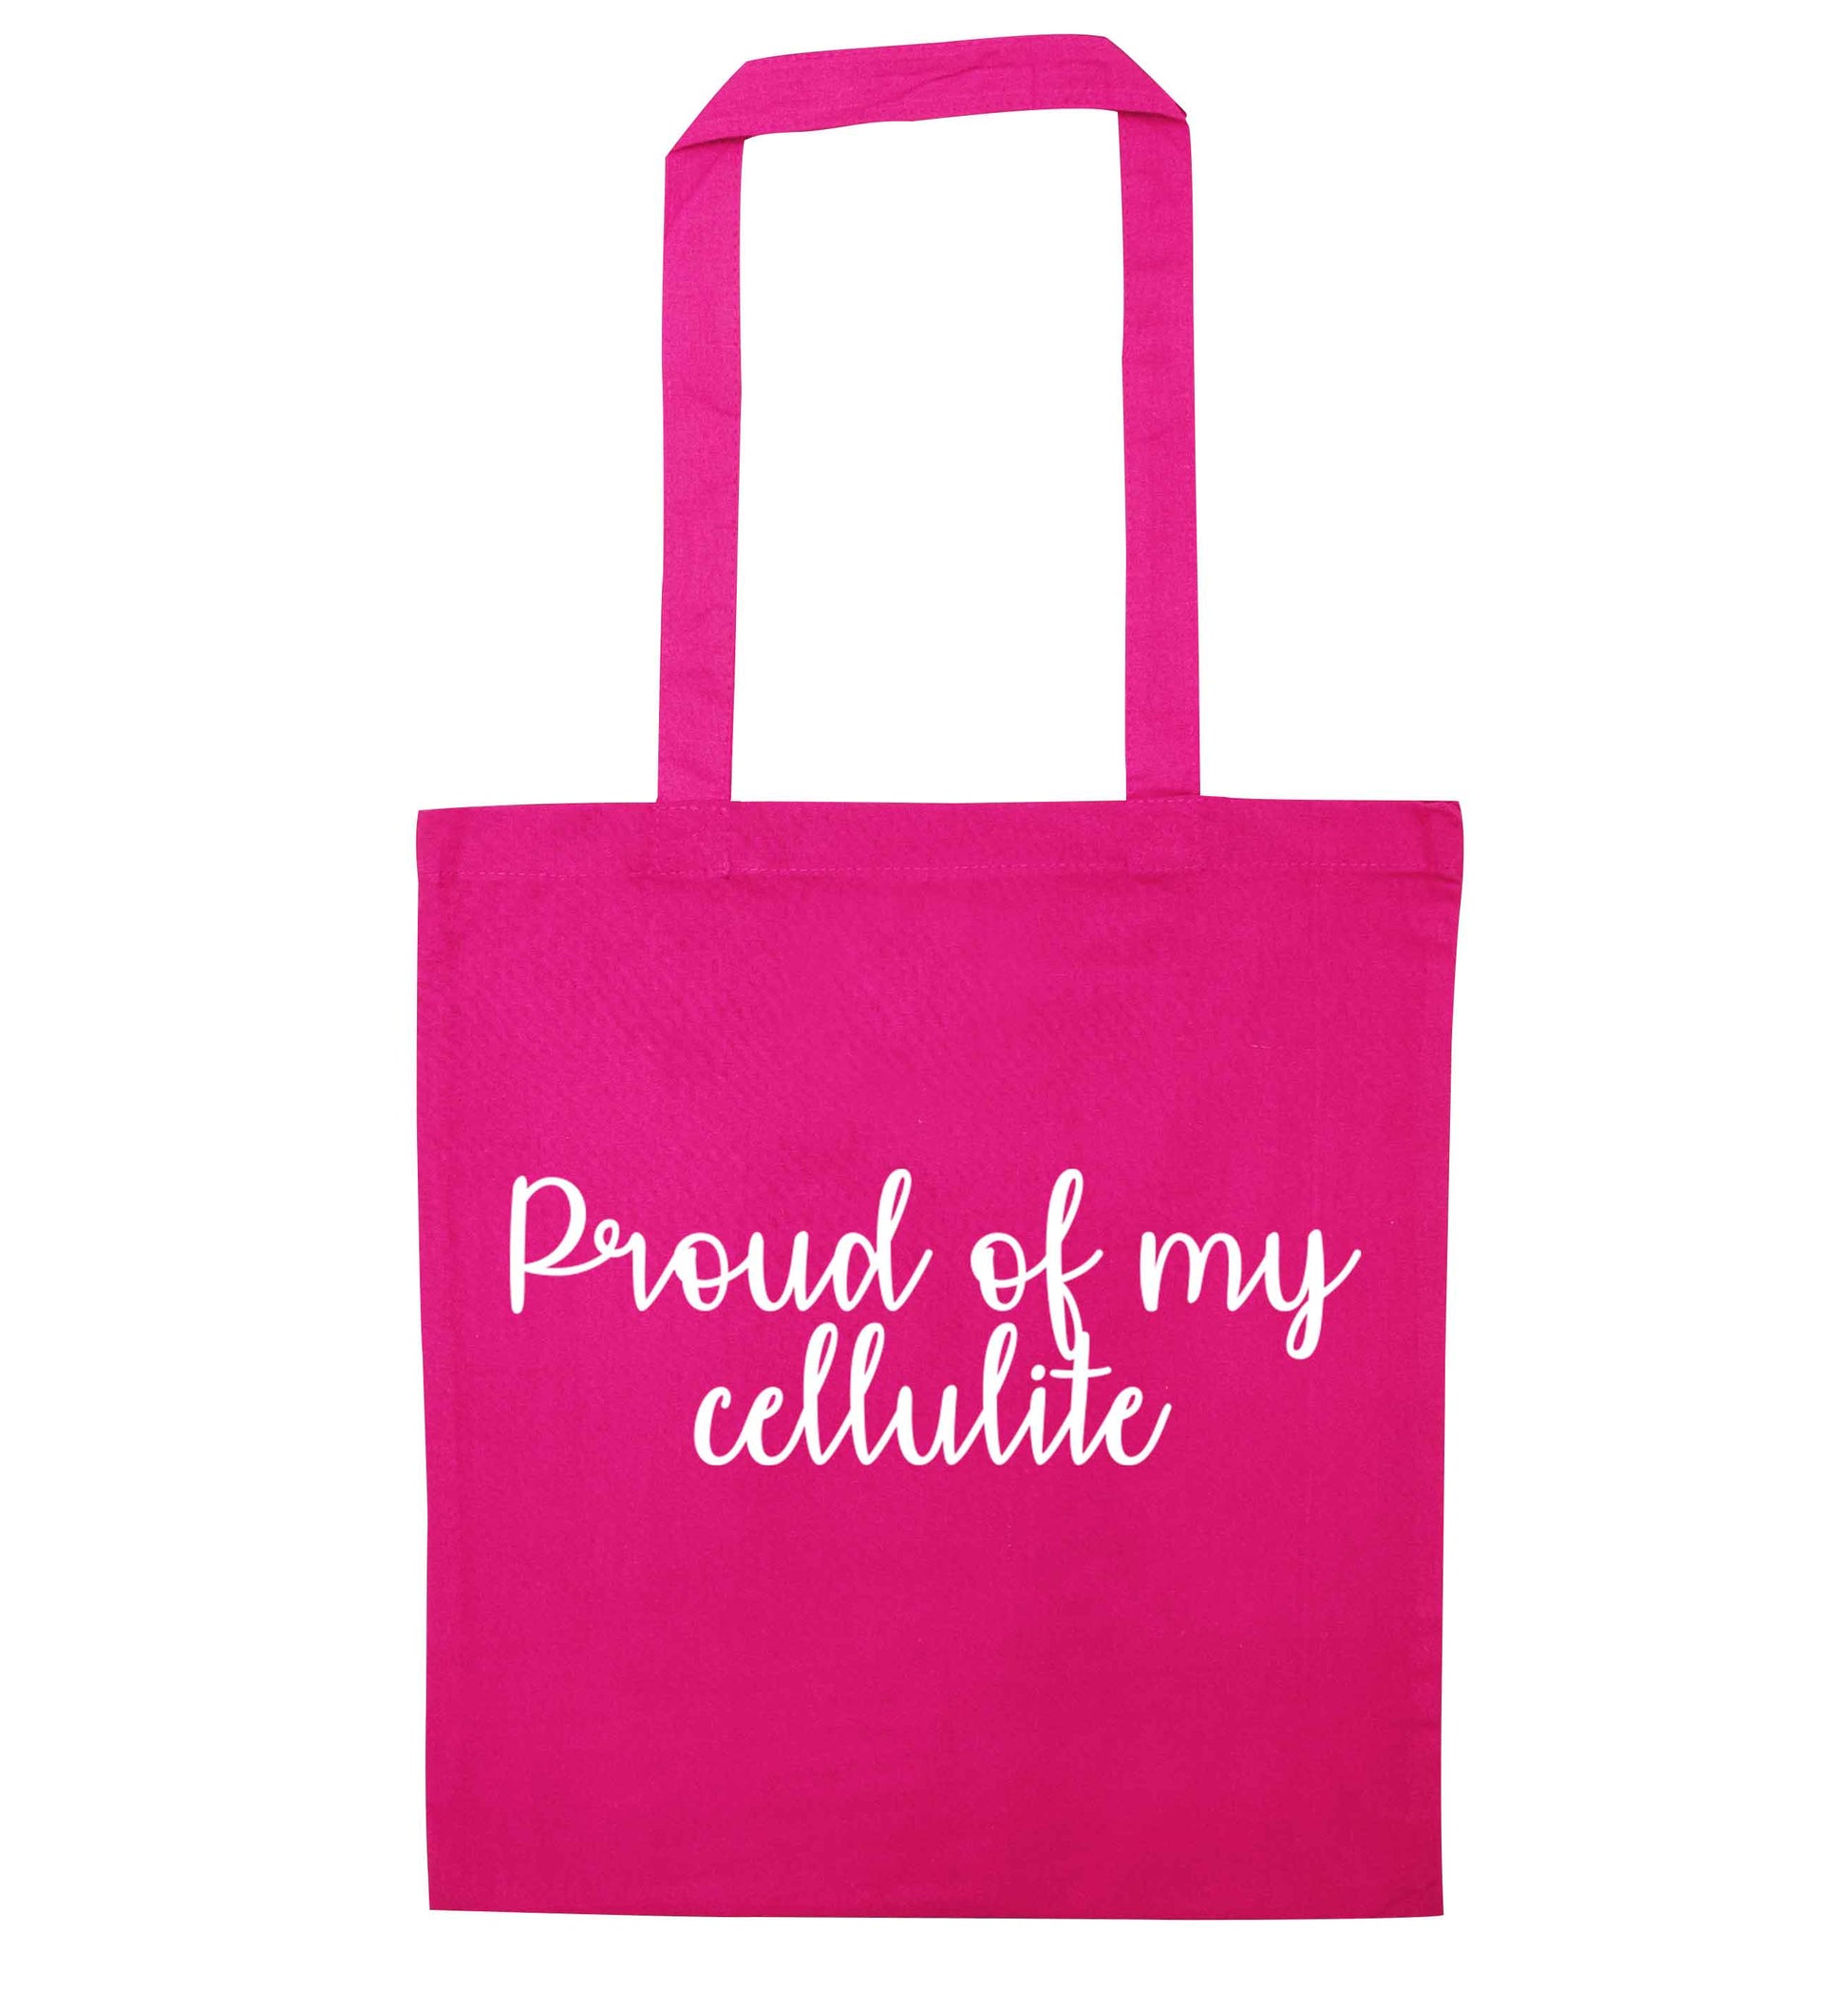 Proud of my cellulite pink tote bag